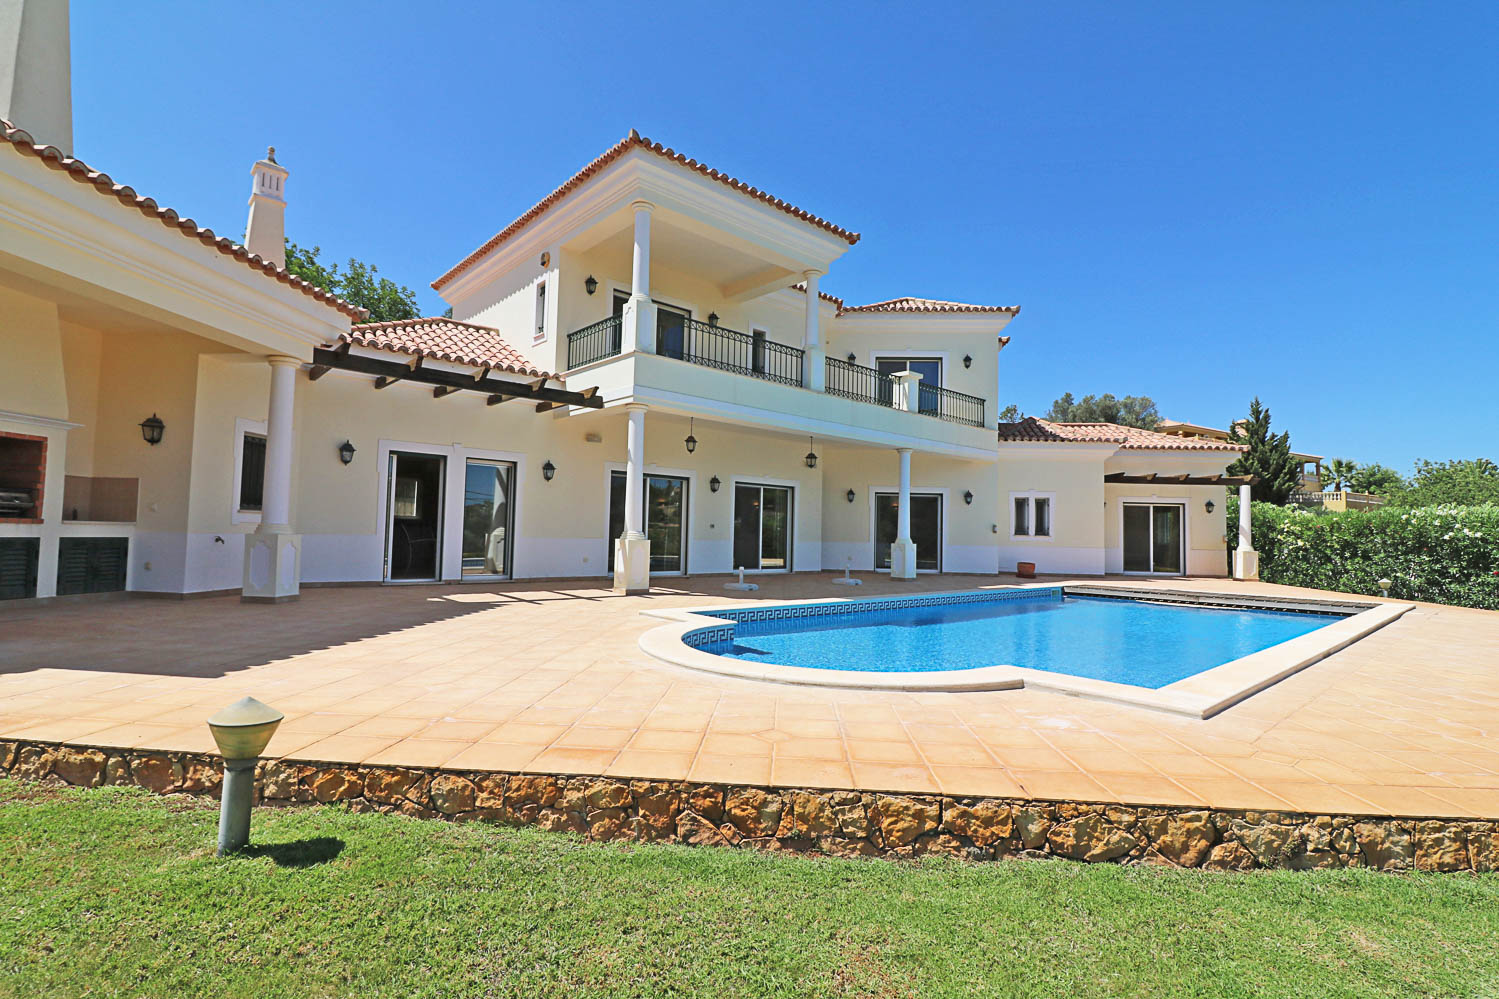 4 Bed, 5 Bath, HouseFor Sale, Spacious Four Bedroom Villa with Heated Swimming P, Algarve